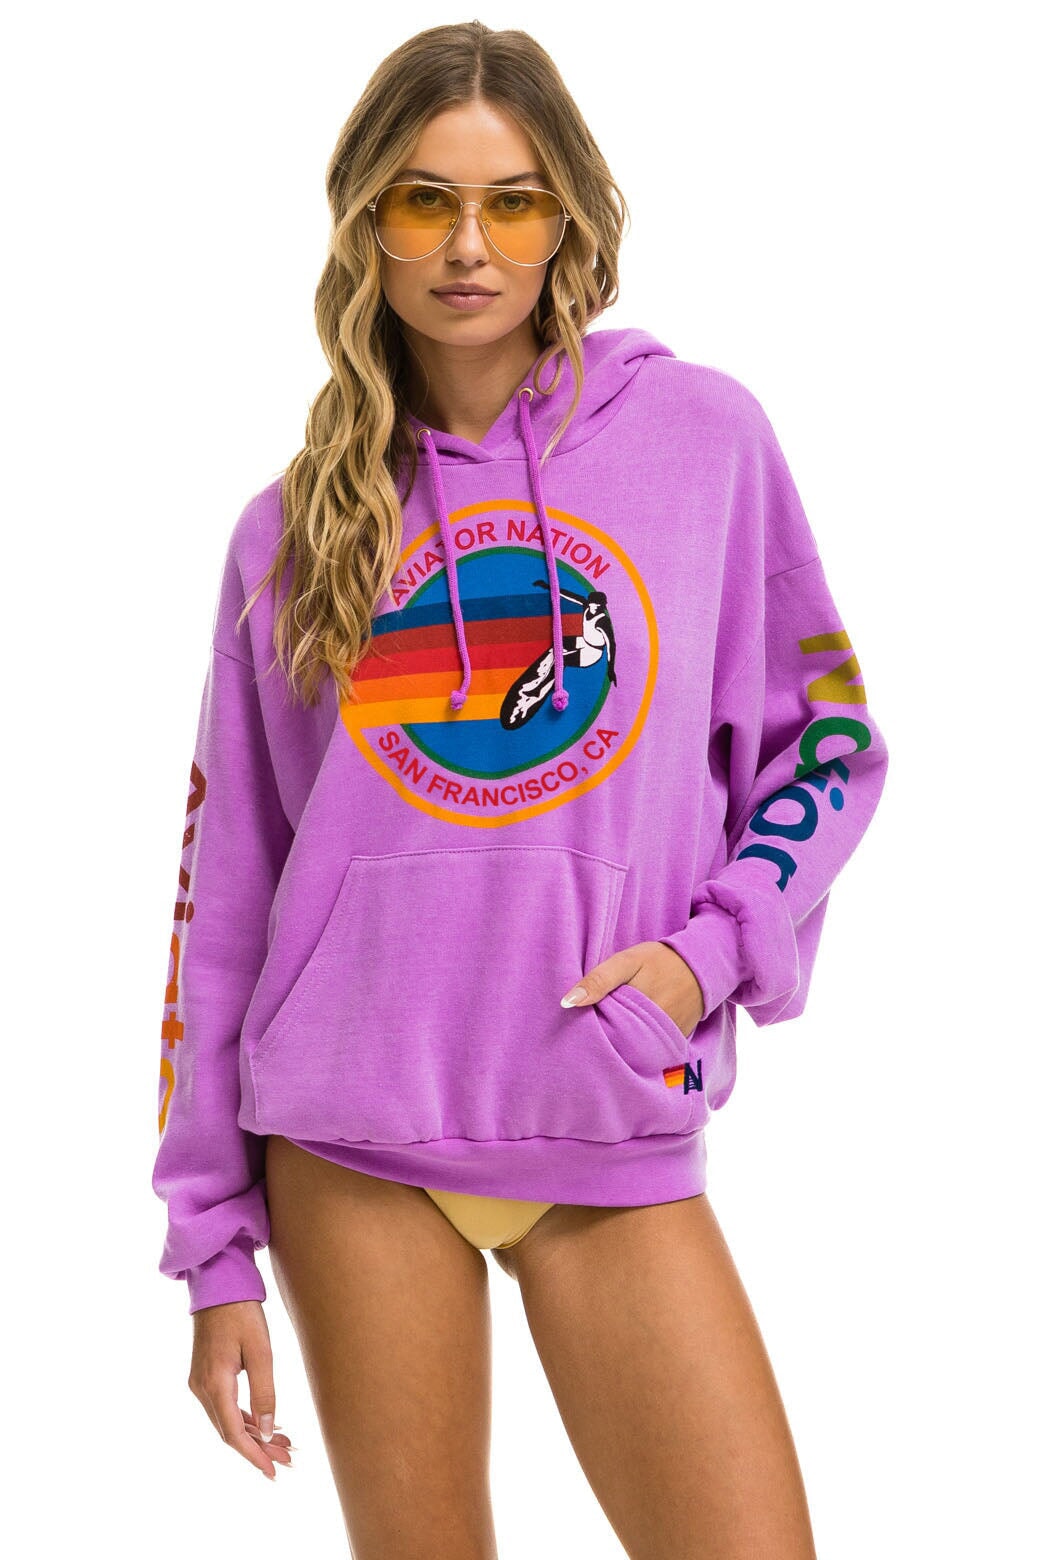 AVIATOR NATION SAN FRANCISCO RELAXED PULLOVER HOODIE - NEON PURPLE Hoodie Aviator Nation 